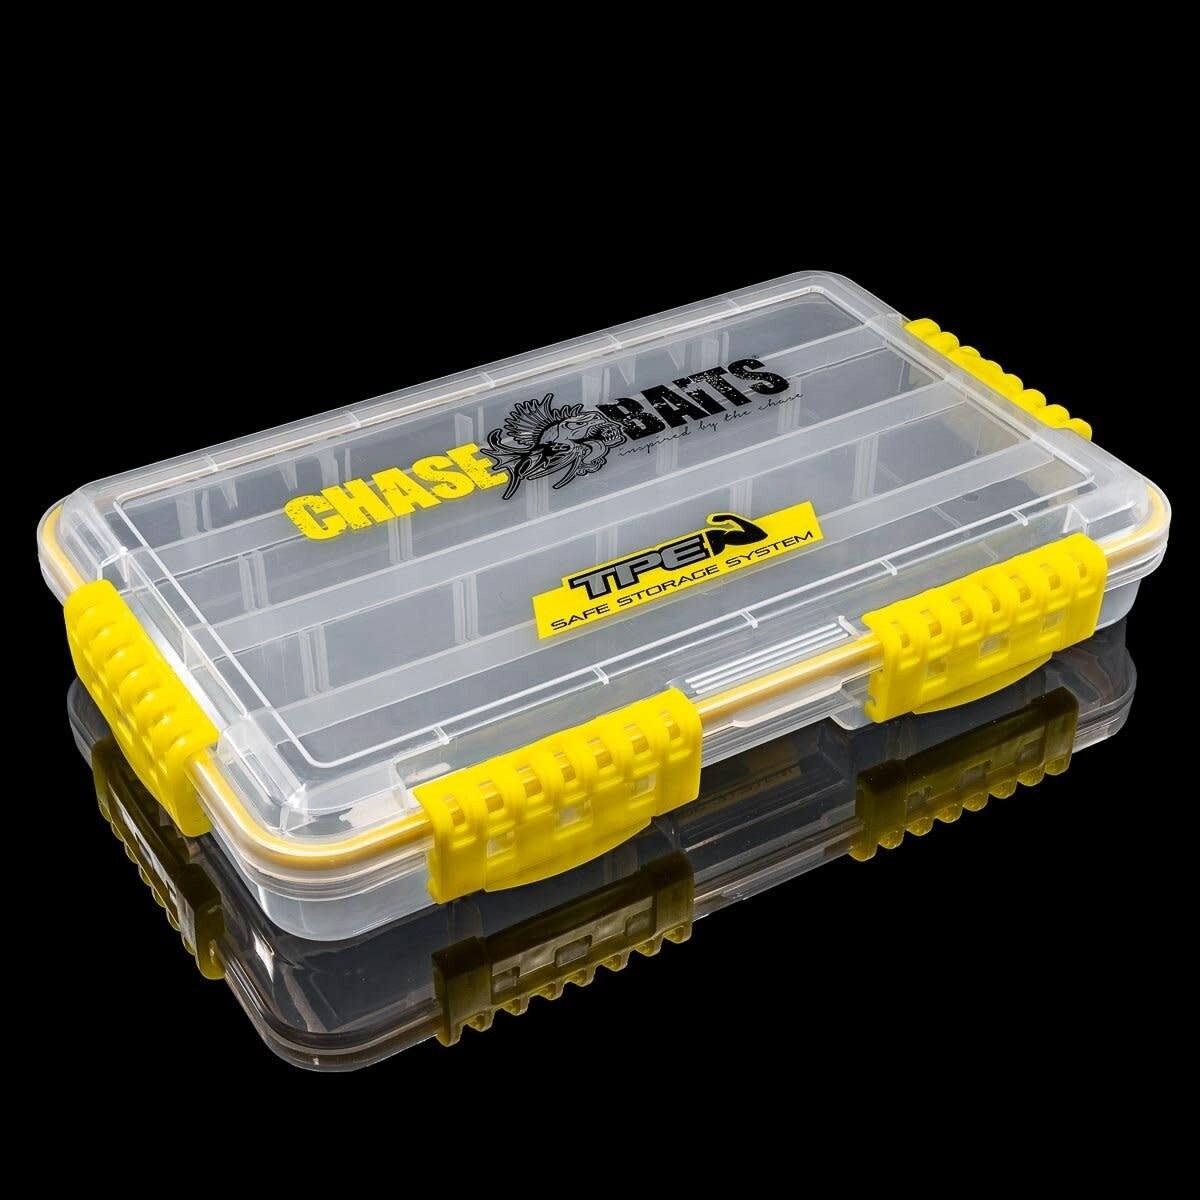 ChaseBaits TACKLE TRAY NonTPE Med